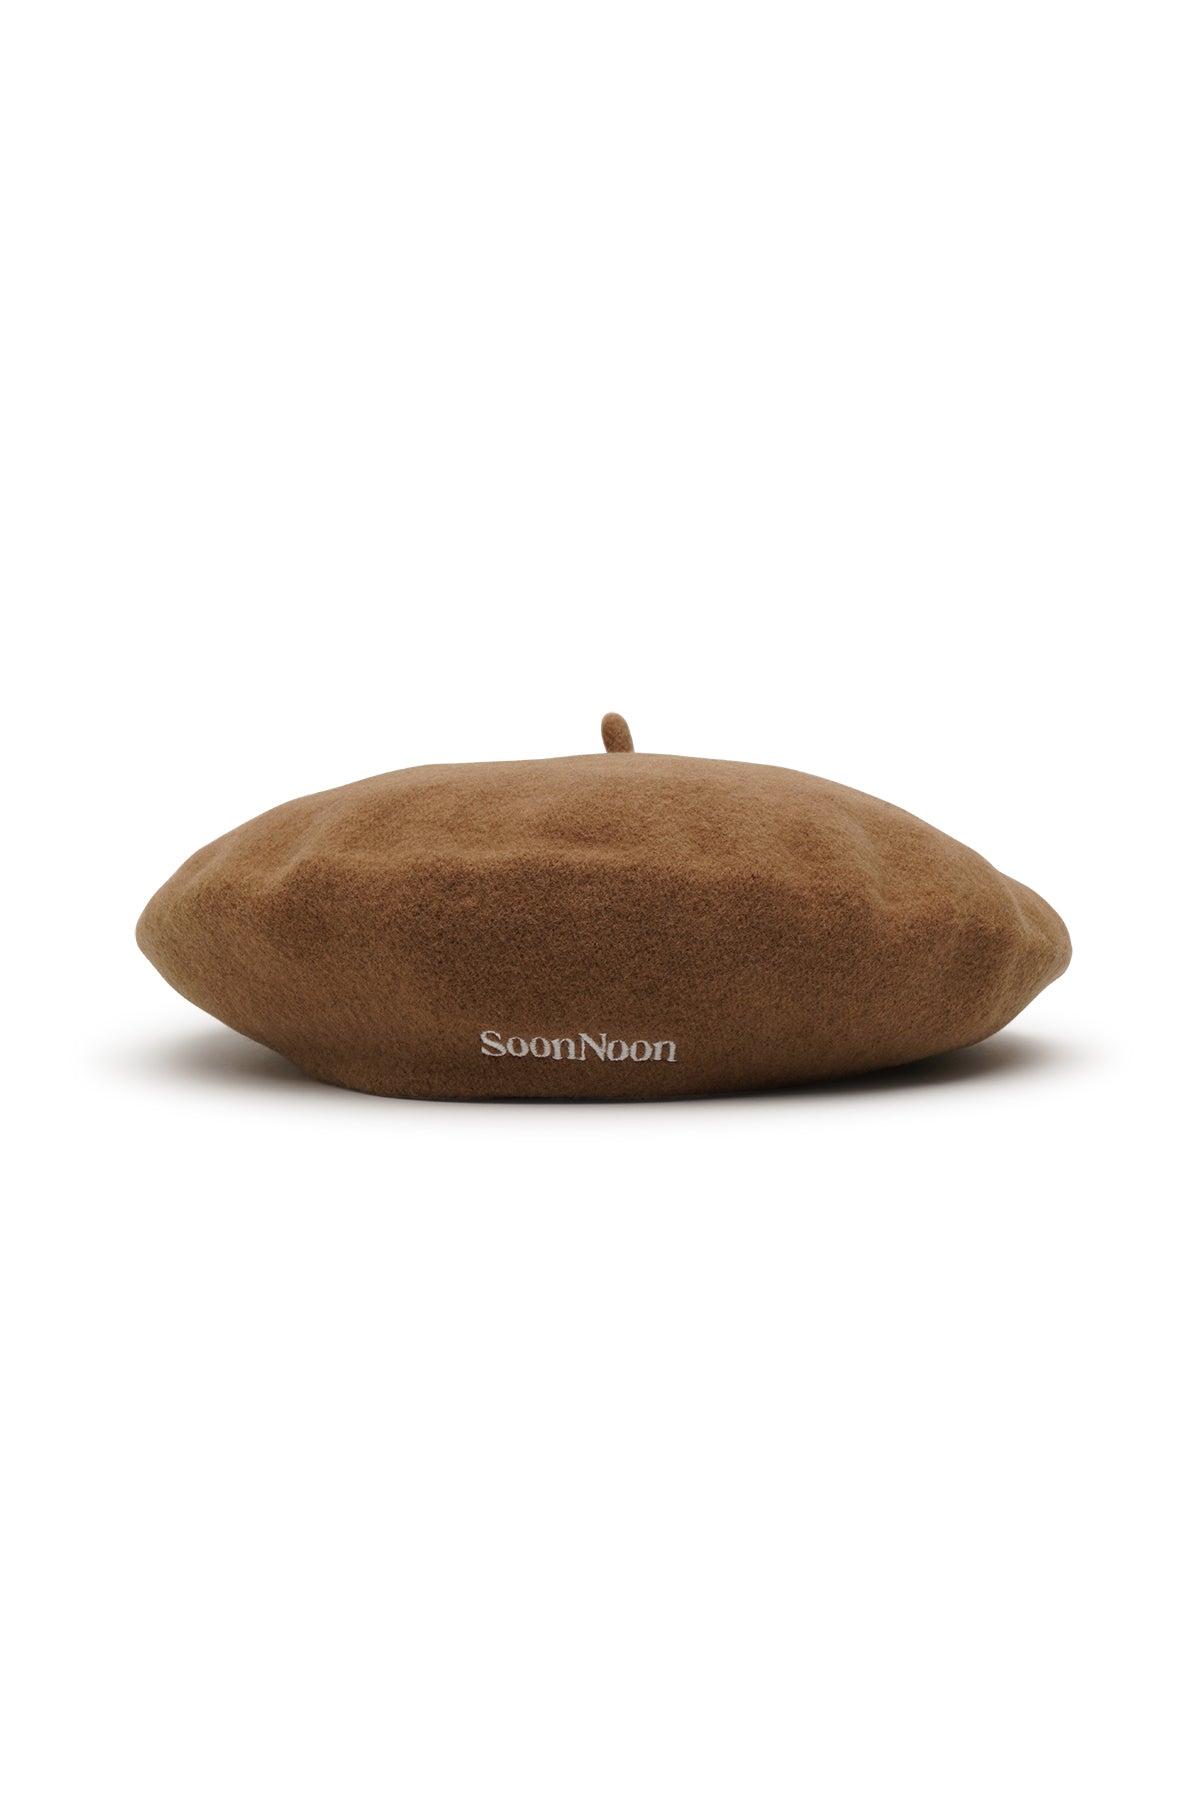 Beige beret hat in 100% wool felt. One size. Unisex hat style in various sizes and colors. We ship worldwide. Shop now.